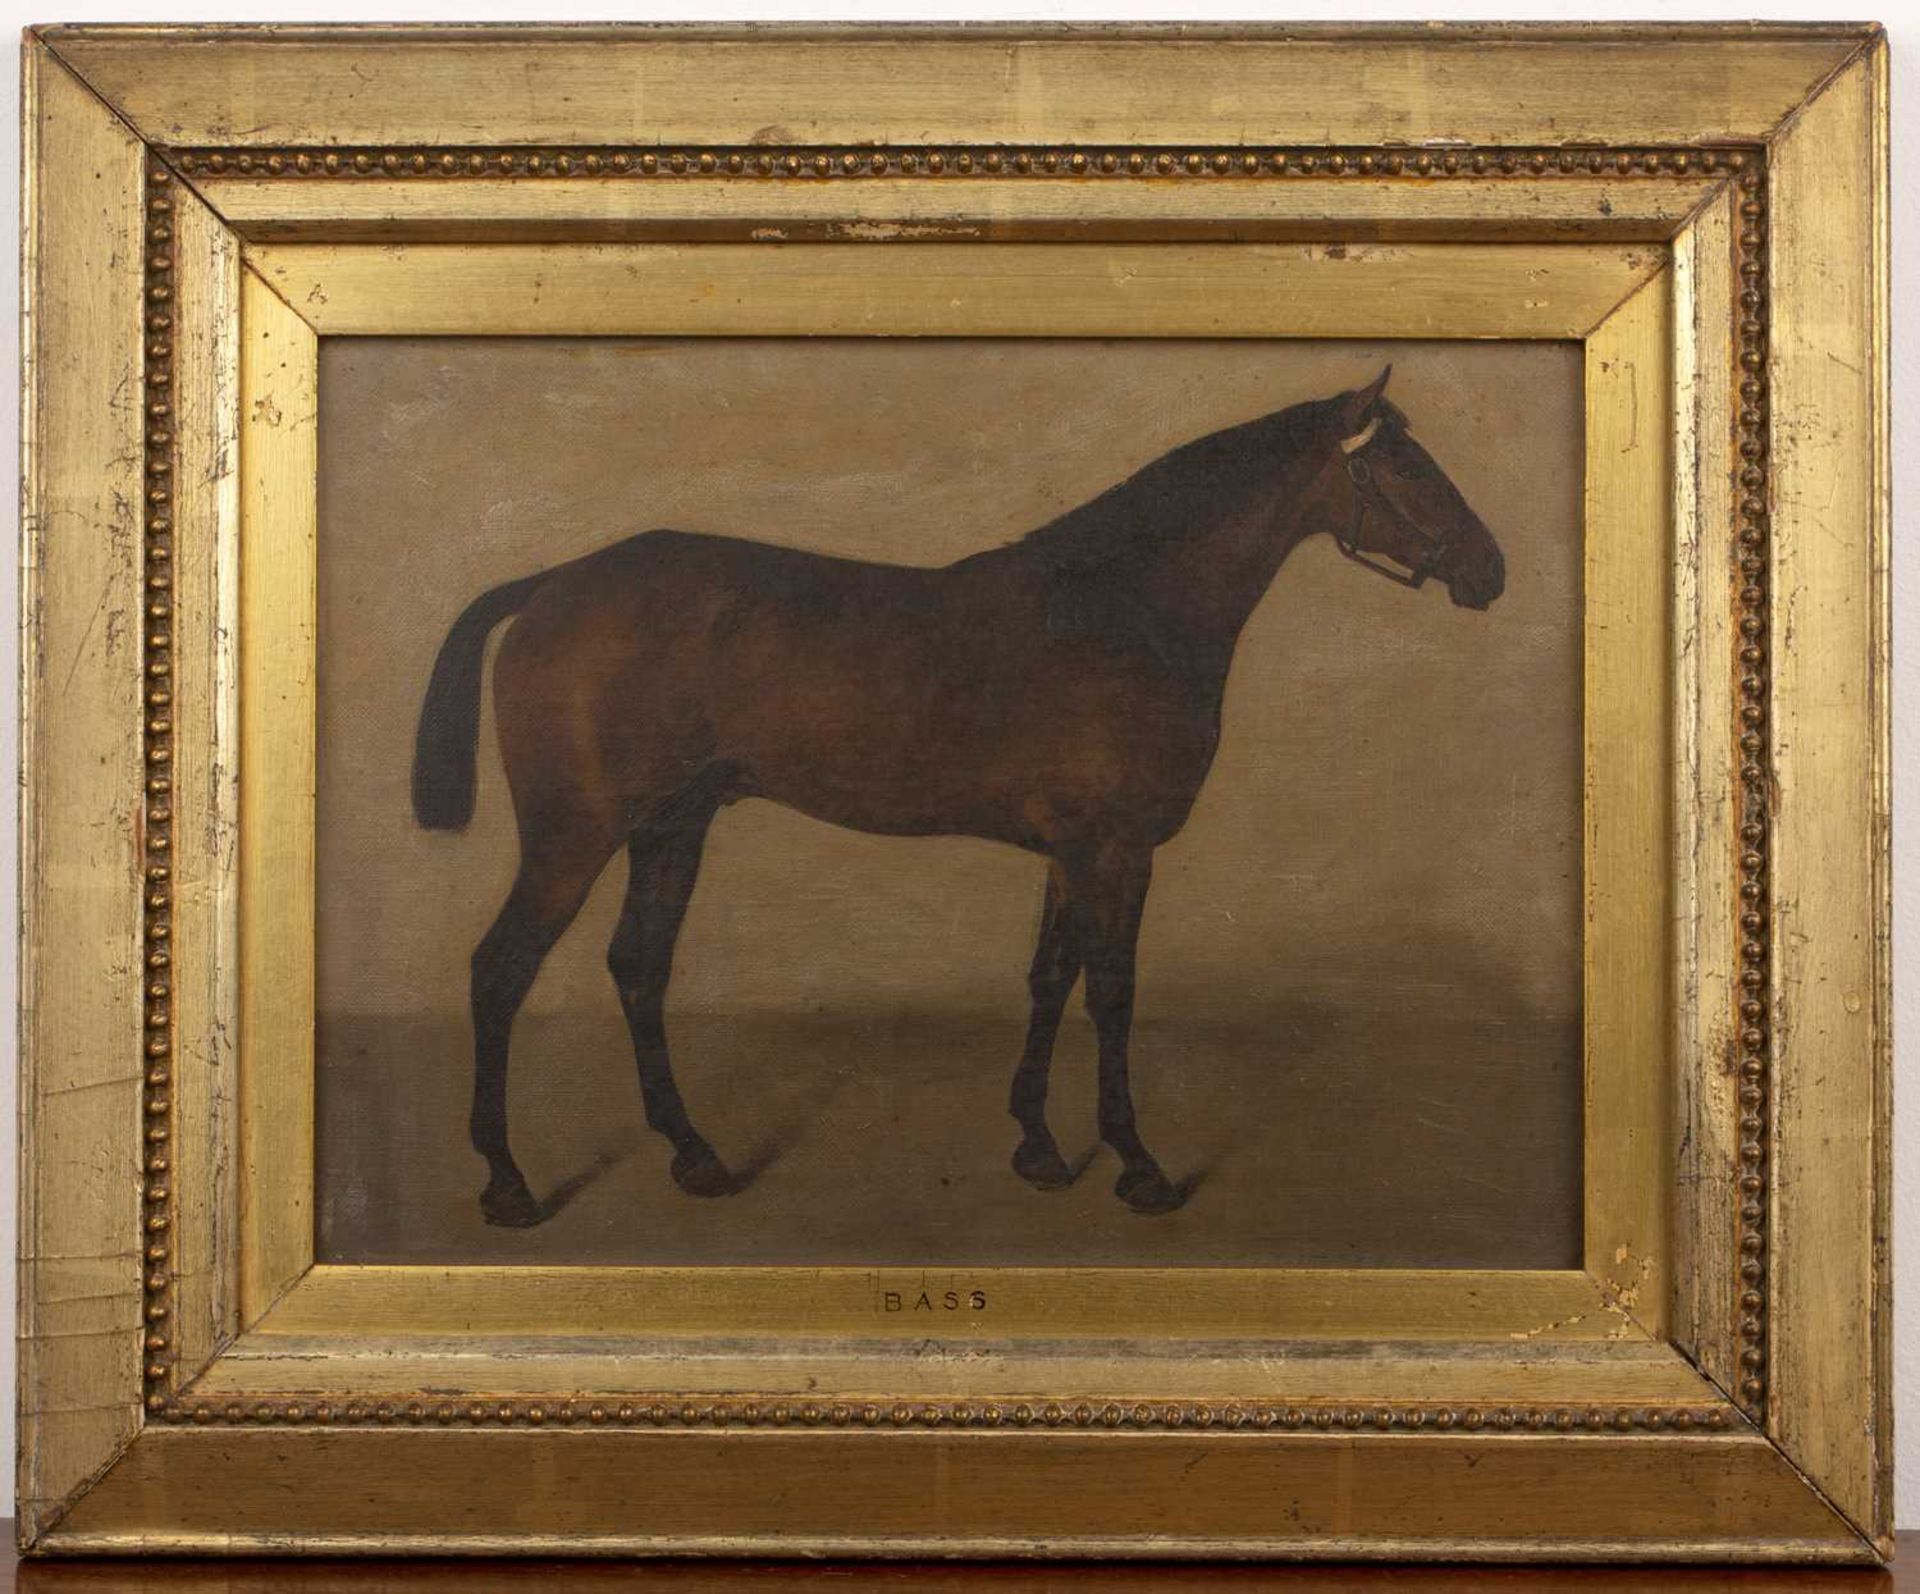 Pair of late 19th/early 20th Century English equestrian studies 'Bass' study of a horse, oil on - Image 5 of 6